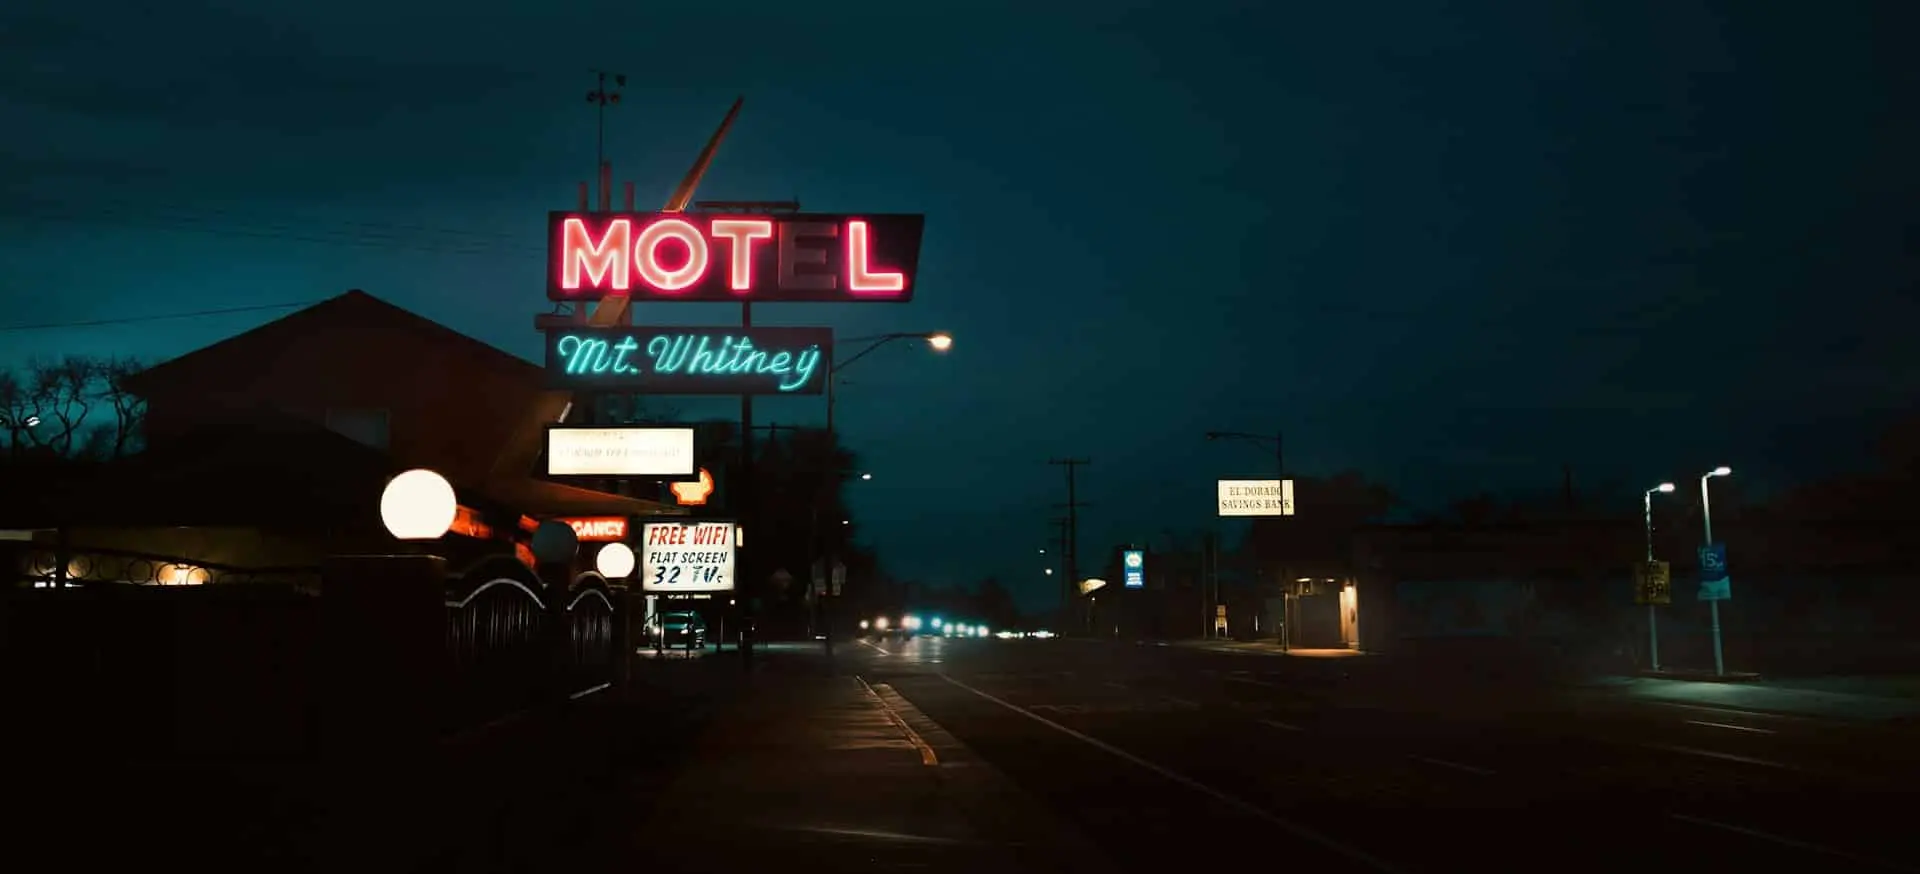 A good night in a legendary motel can be very refreshing.